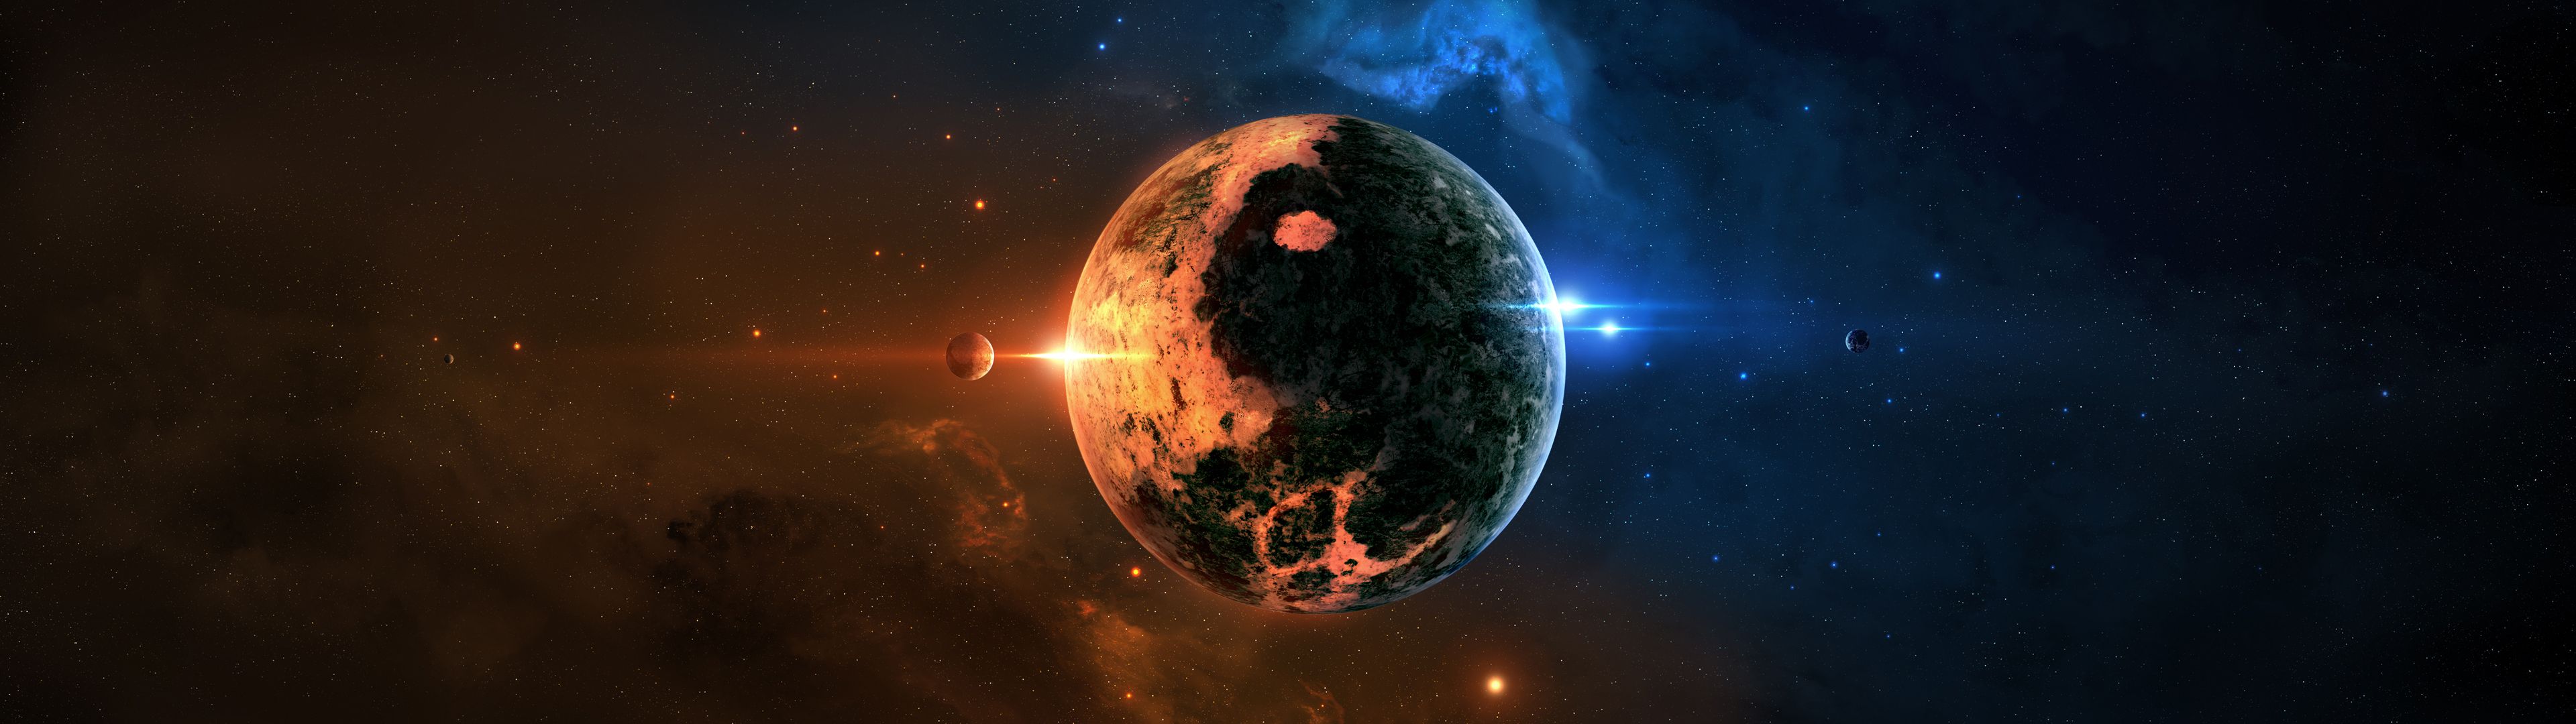 Planet In Outer Space Dual Screen Wallpaper | 3840x1080 | ID:48207